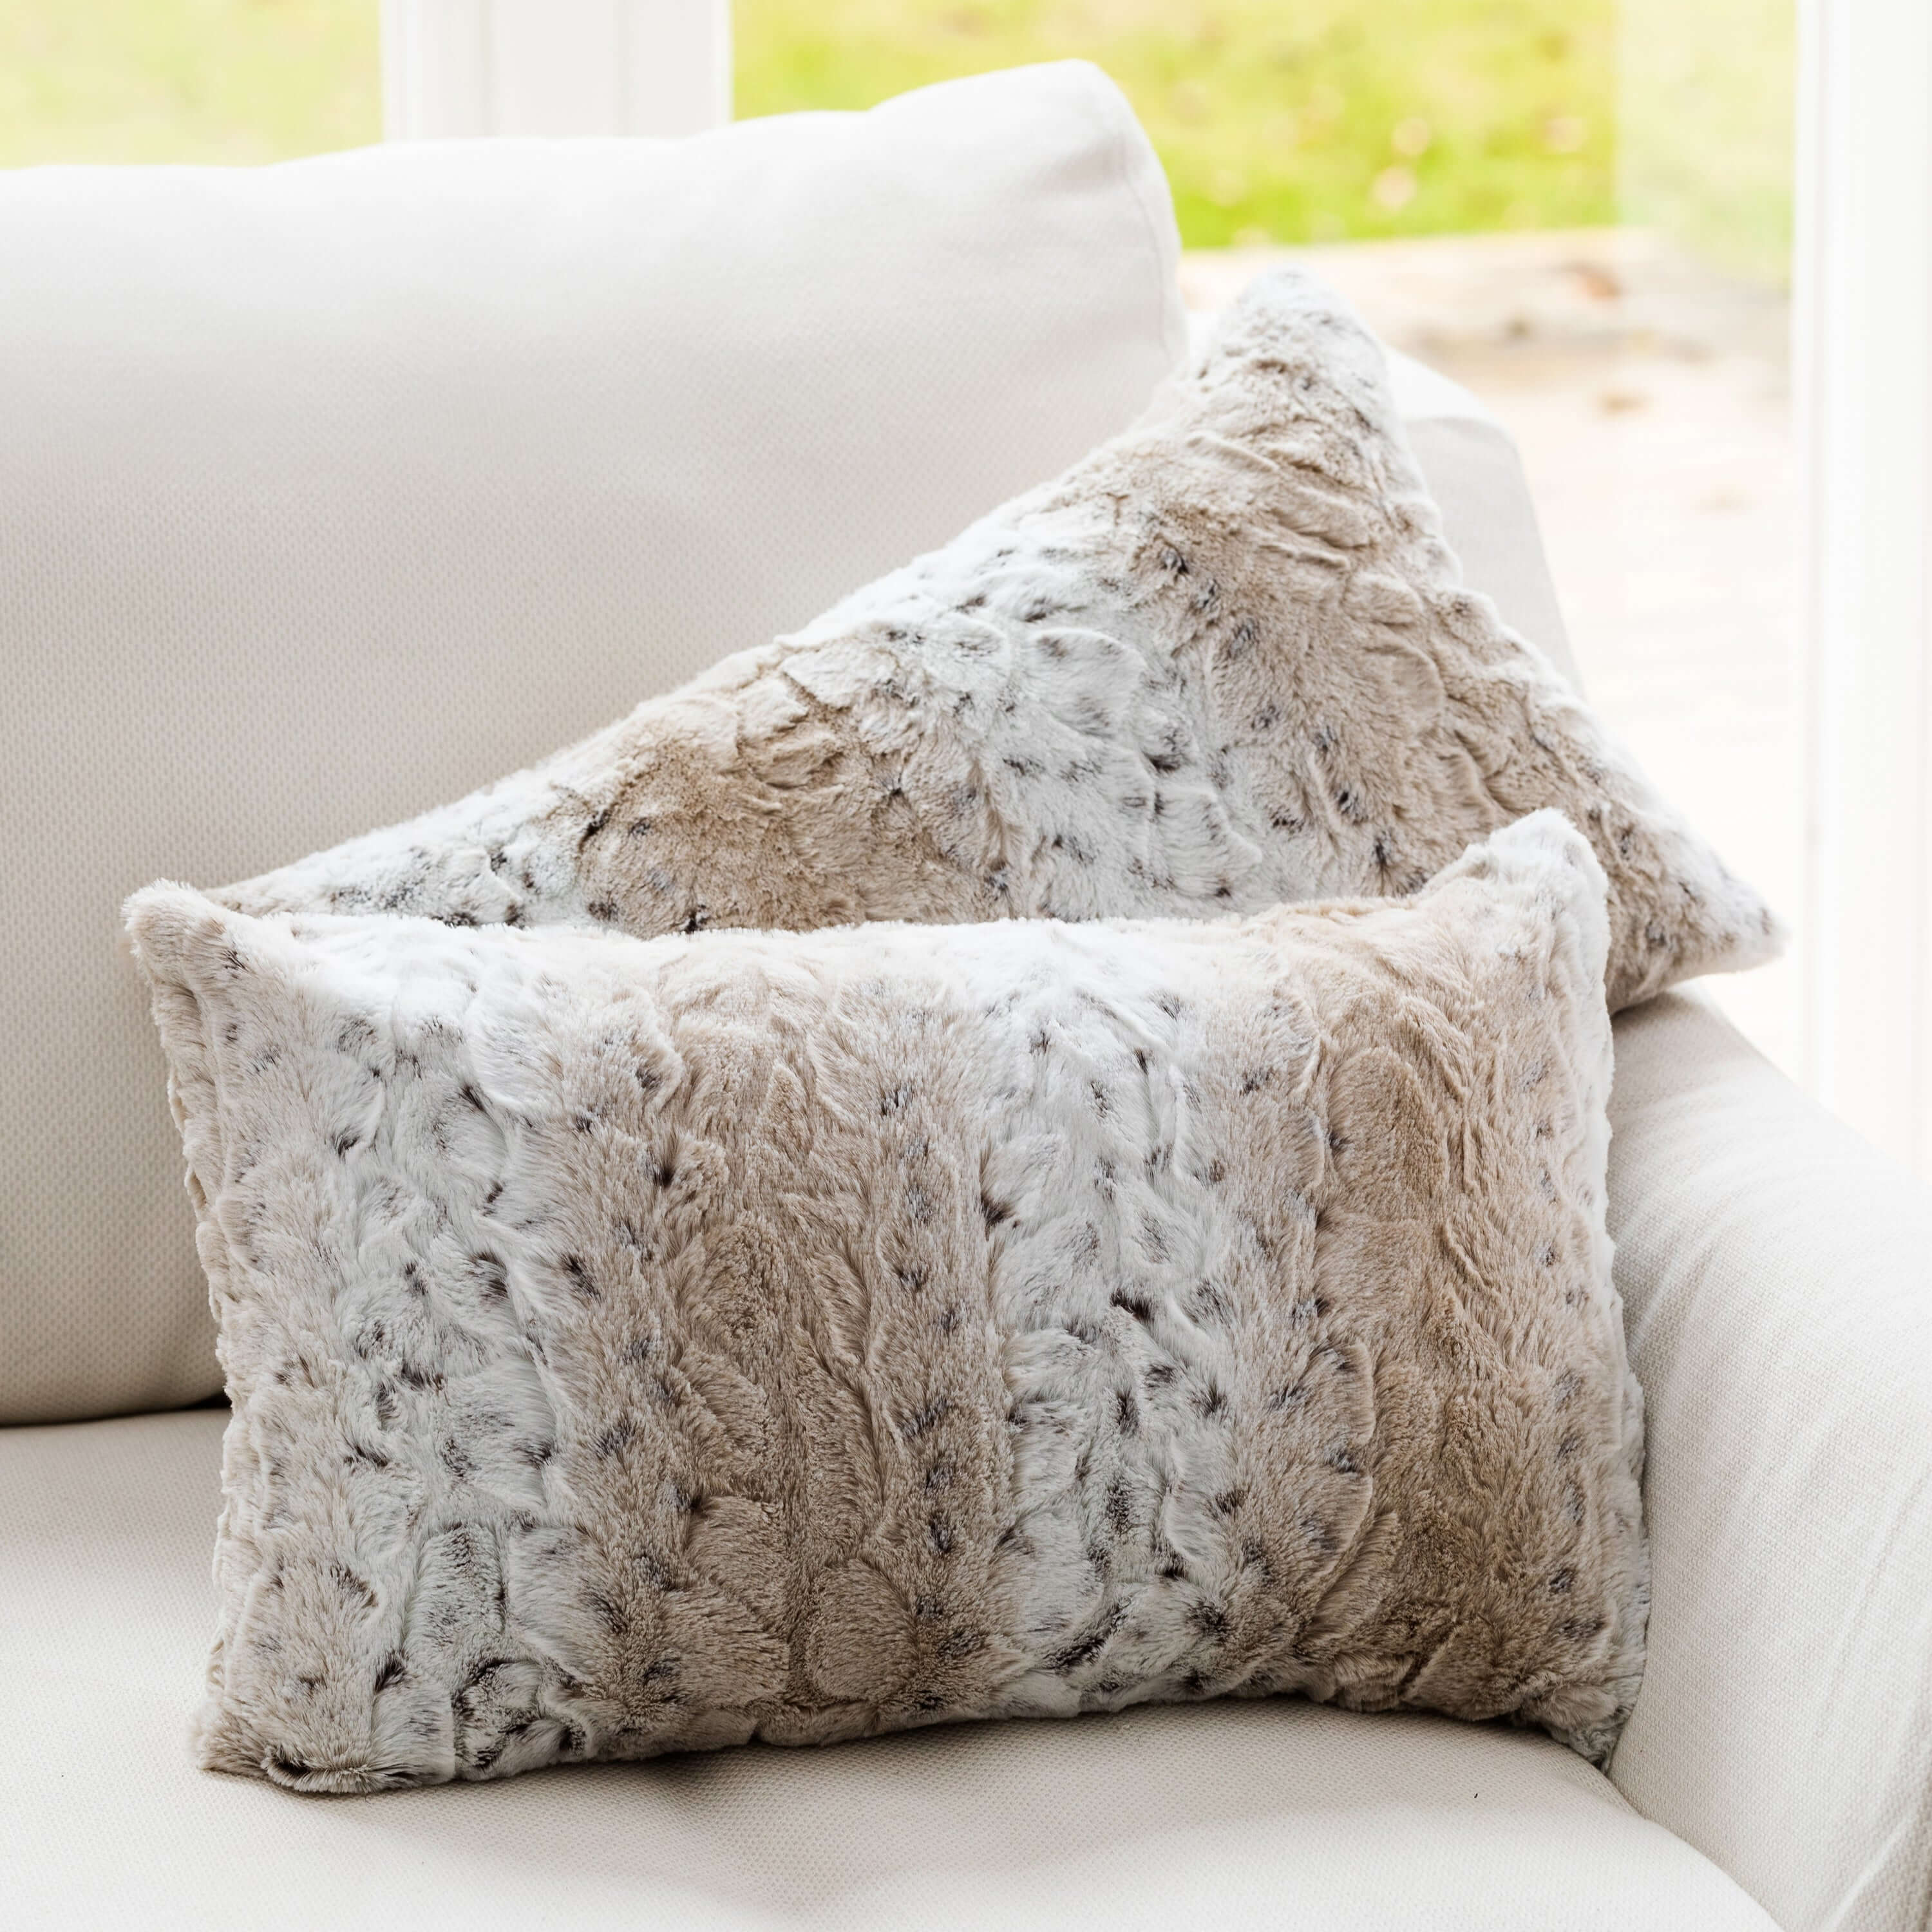 https://cdn.shopify.com/s/files/1/2091/6511/products/cheer-collection-embossed-faux-fur-throw-pillows-12-x-20-snow-leopard-set-of-2-140174.jpg?v=1671781078